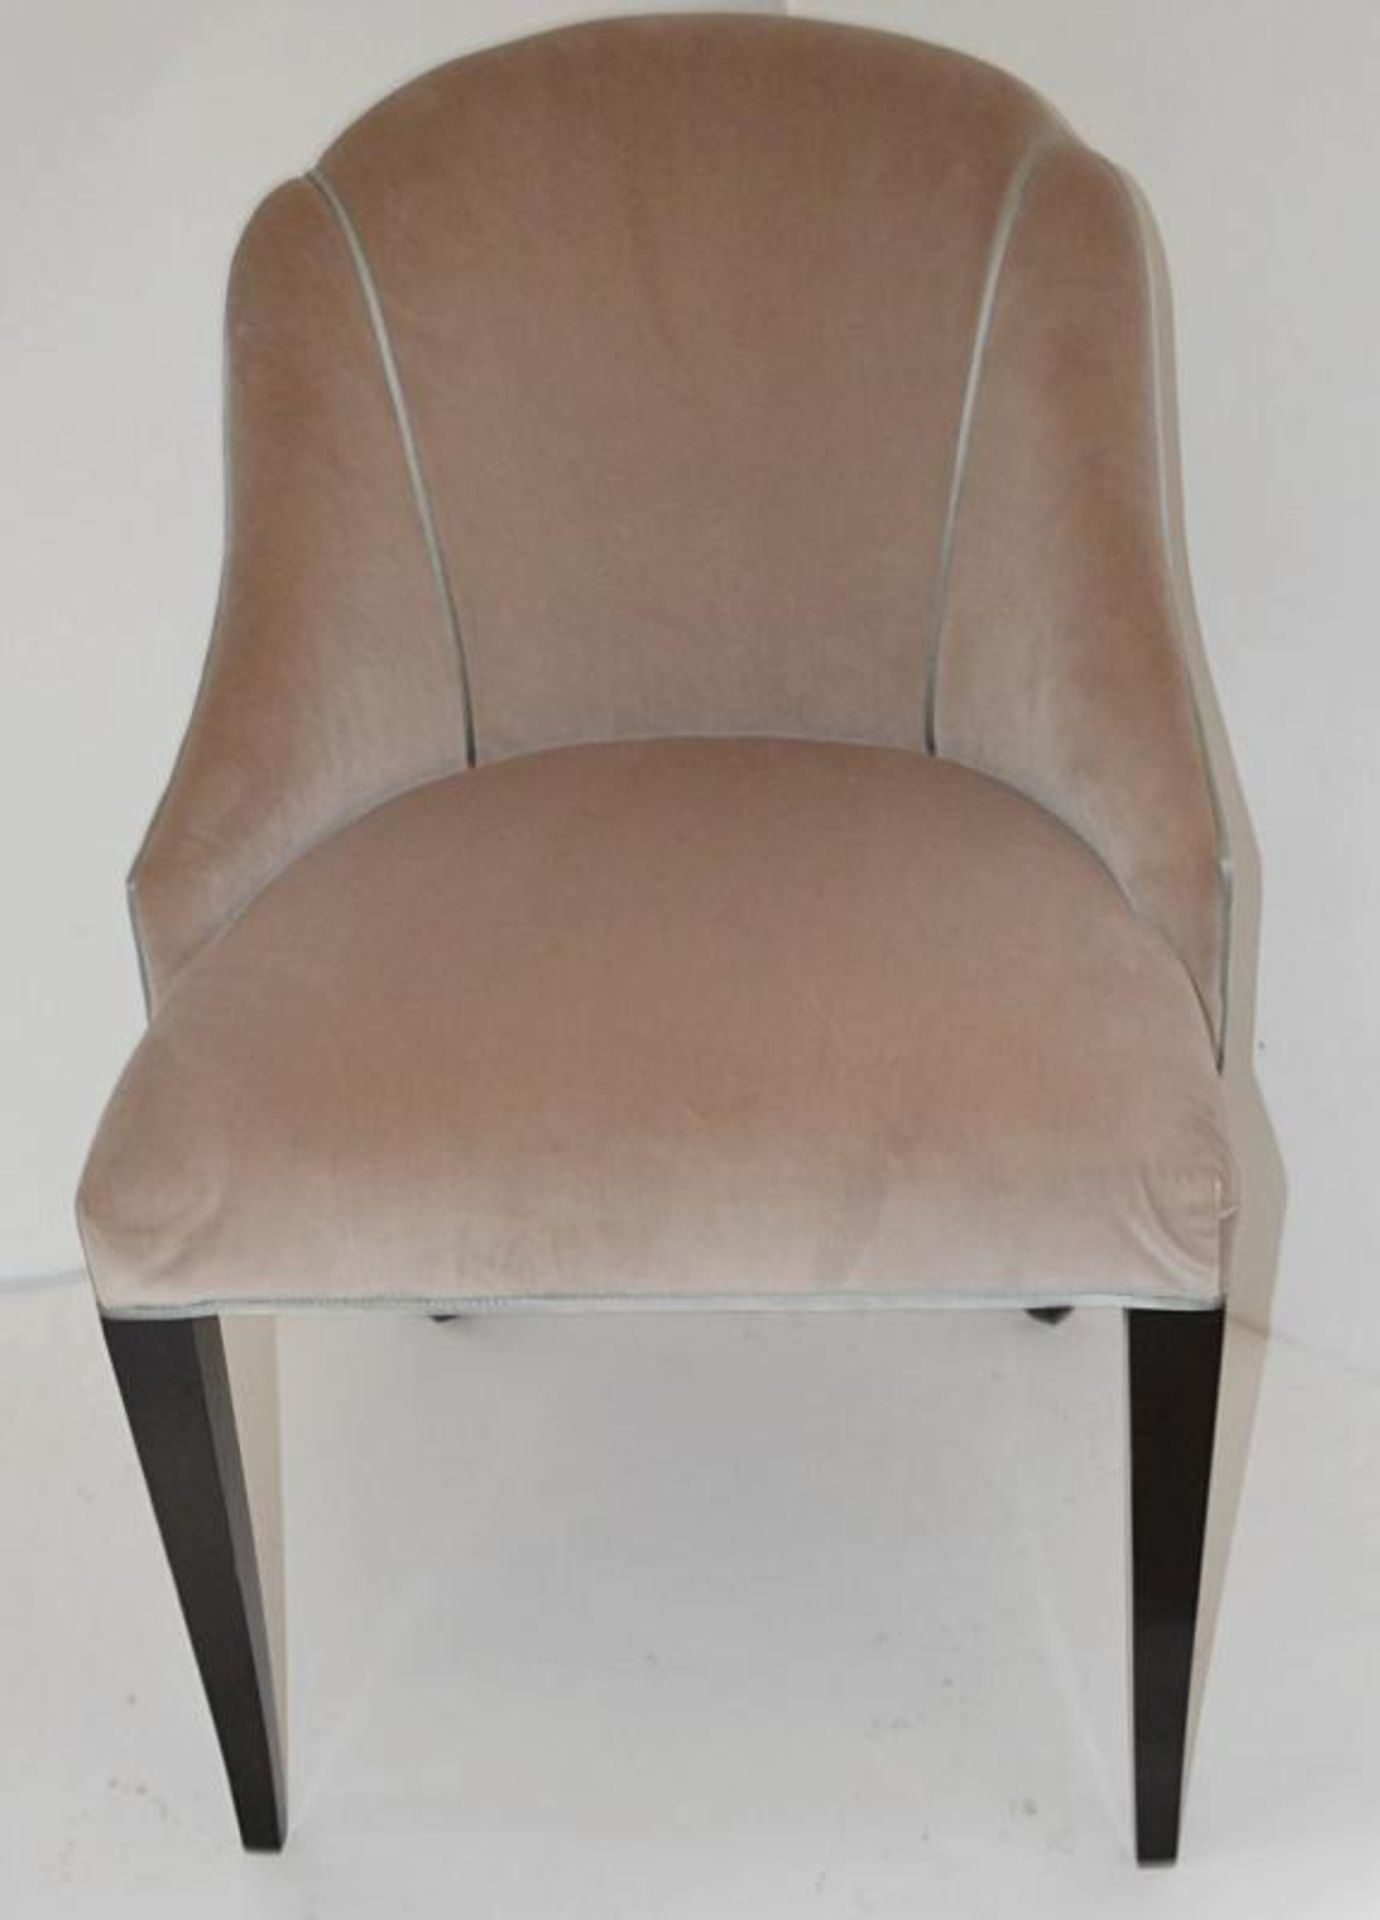 1 x REED &amp; RACKSTRAW "Cloud" Velvet Upholstered Handcrafted Chair - Dimensions: H87 x W58 x D5 - Image 2 of 12